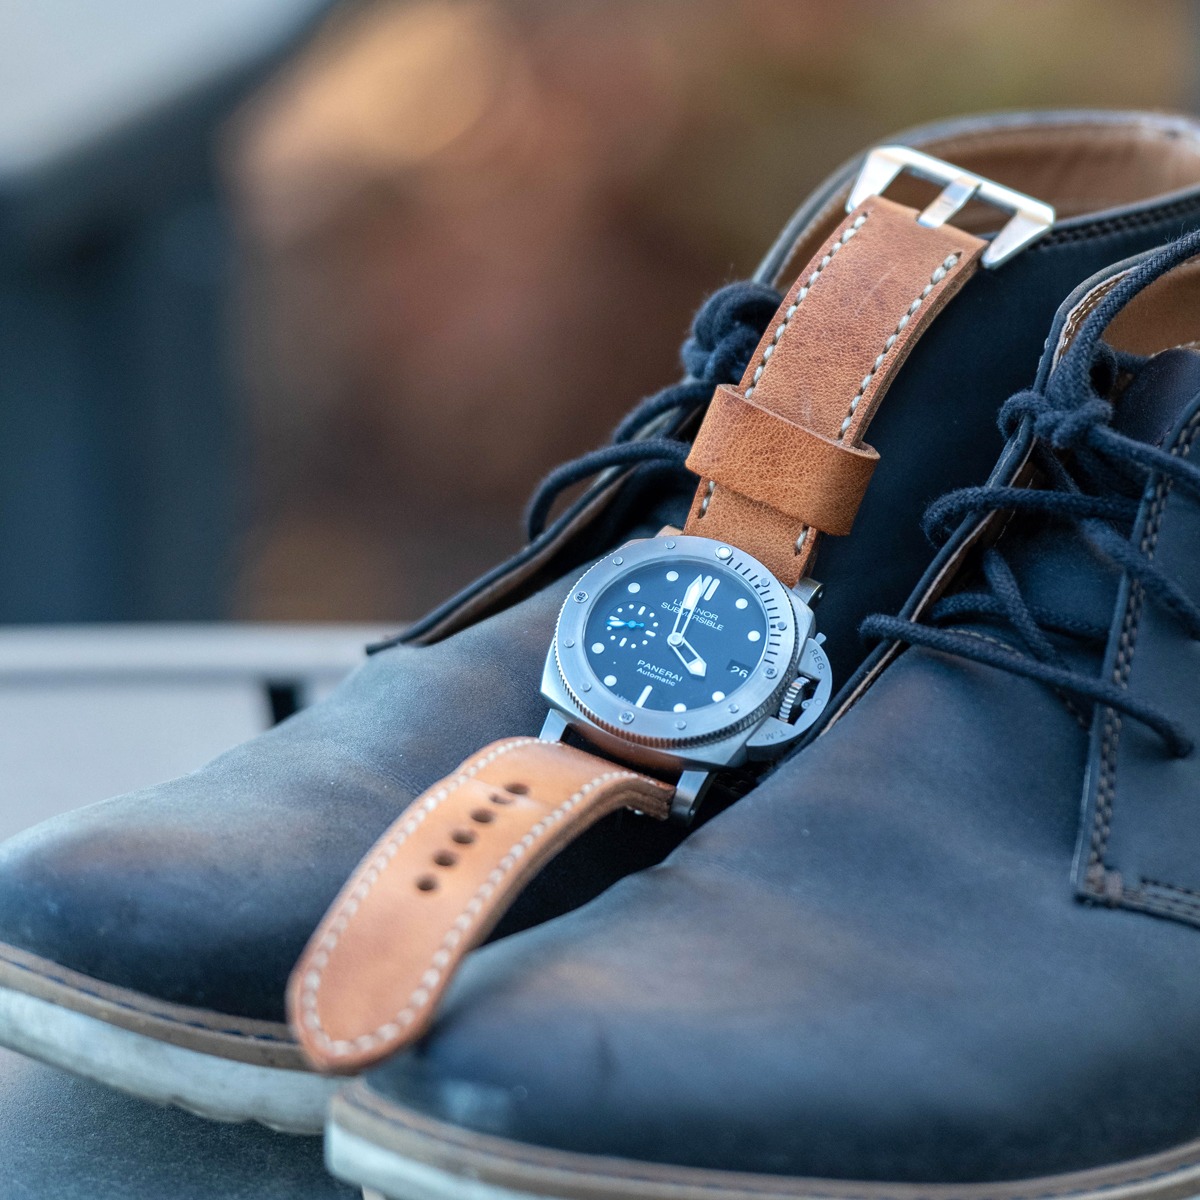 Panerai 682 on Horween Derby leather with natural stitching. © Sidney Chan